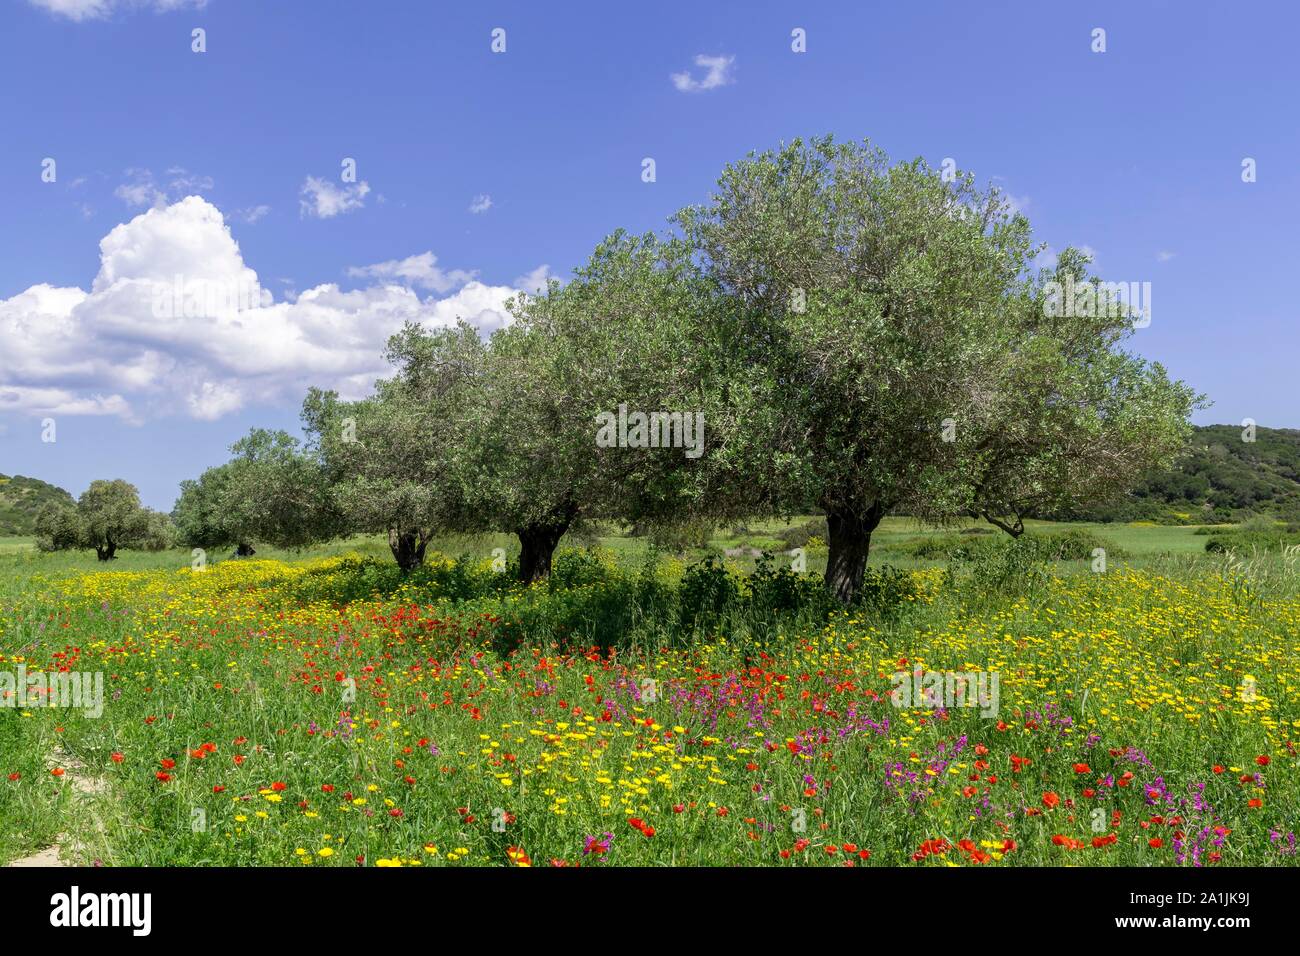 Olive trees and flower meadow, Dipkarpaz Peninsula, Famagusta, Turkish Republic of Northern Cyprus, Cyprus Stock Photo